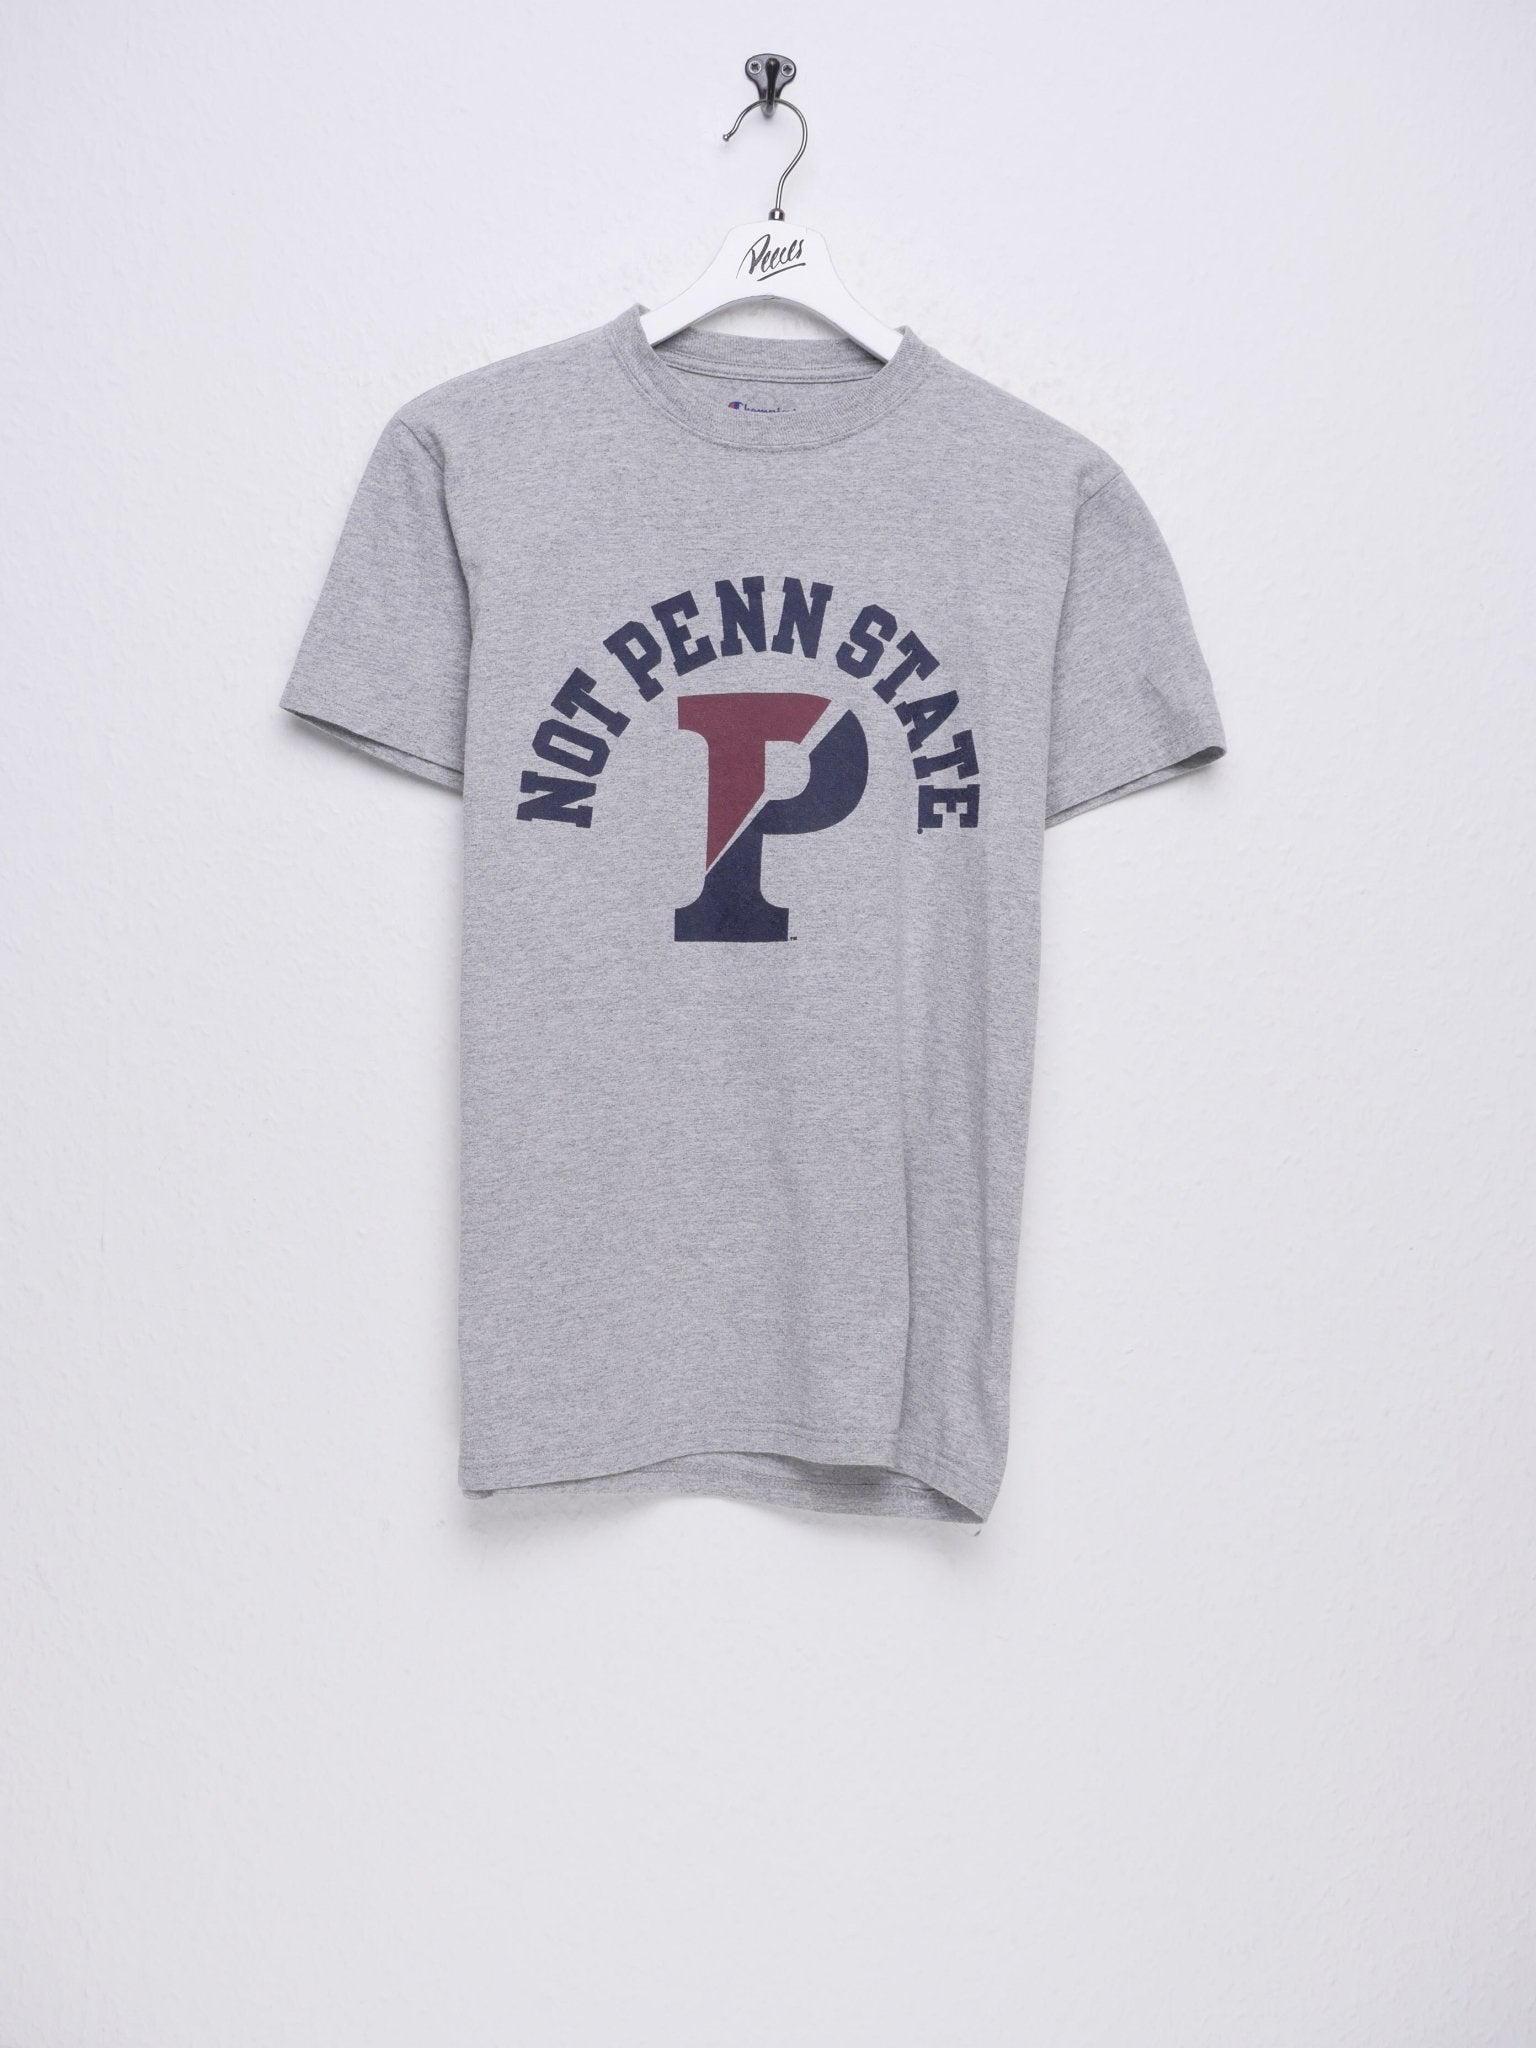 Champion embroidered Logo 'Not Penn State' grey Shirt - Peeces